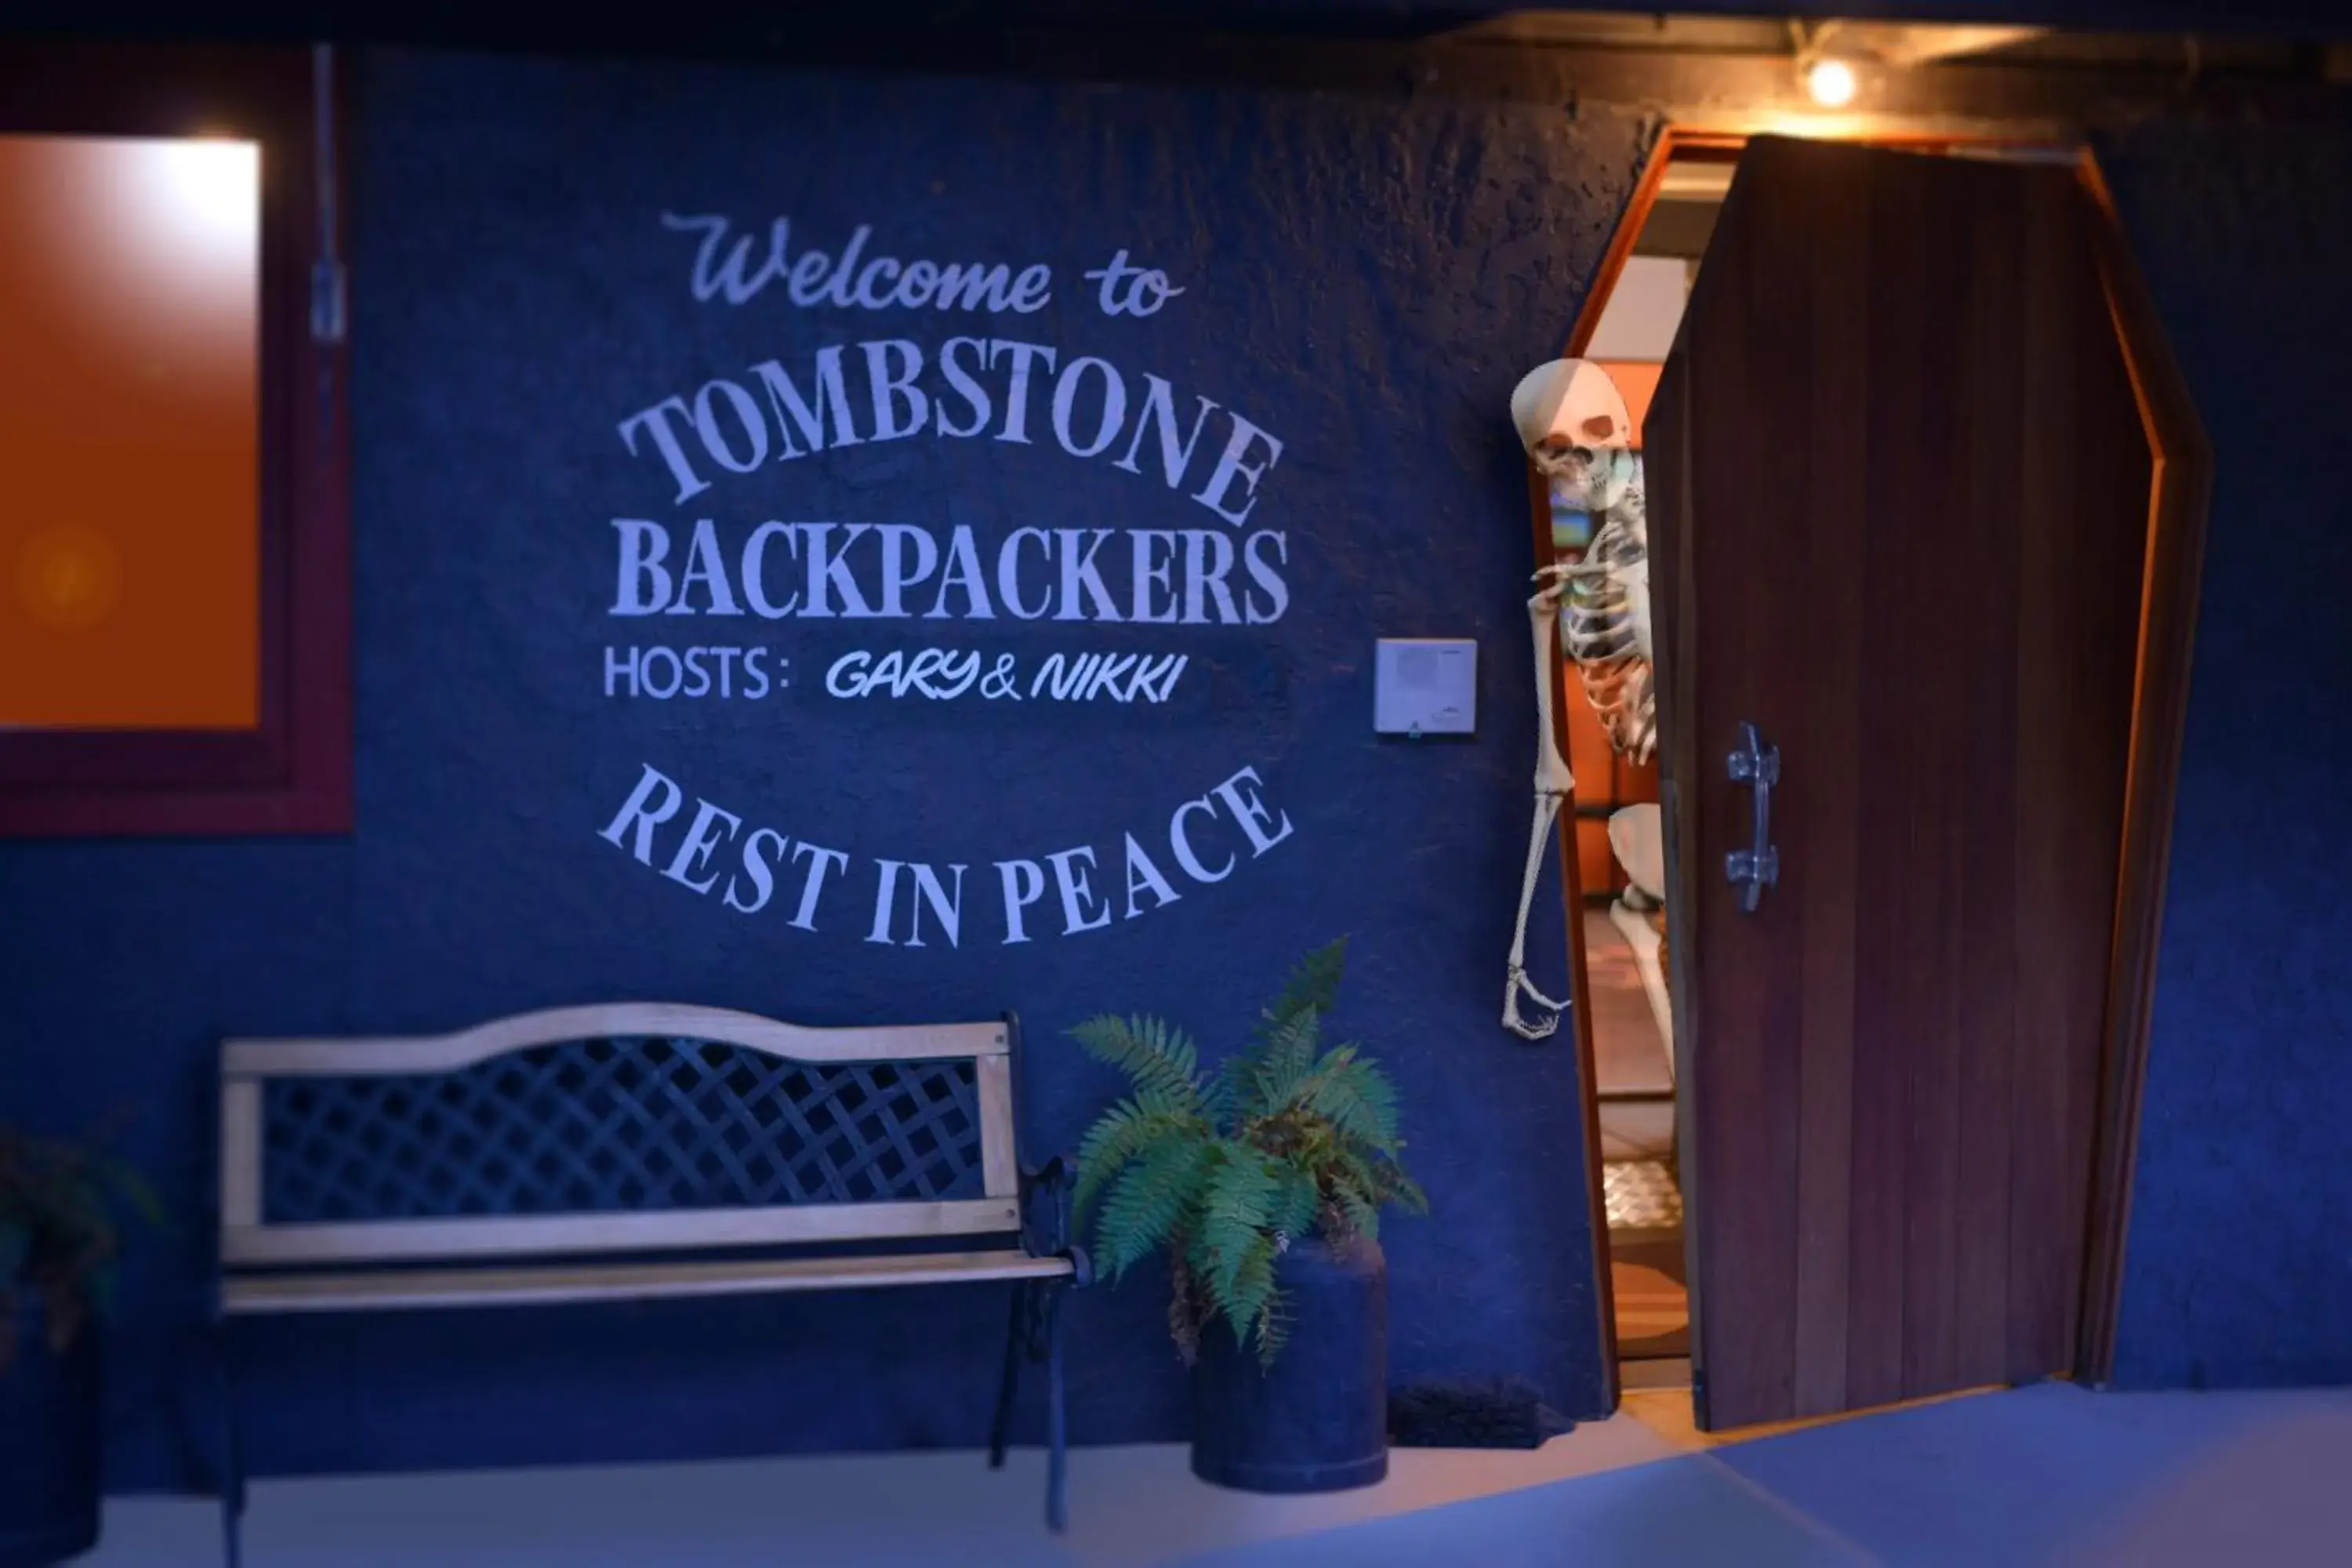 Tombstone Backpackers